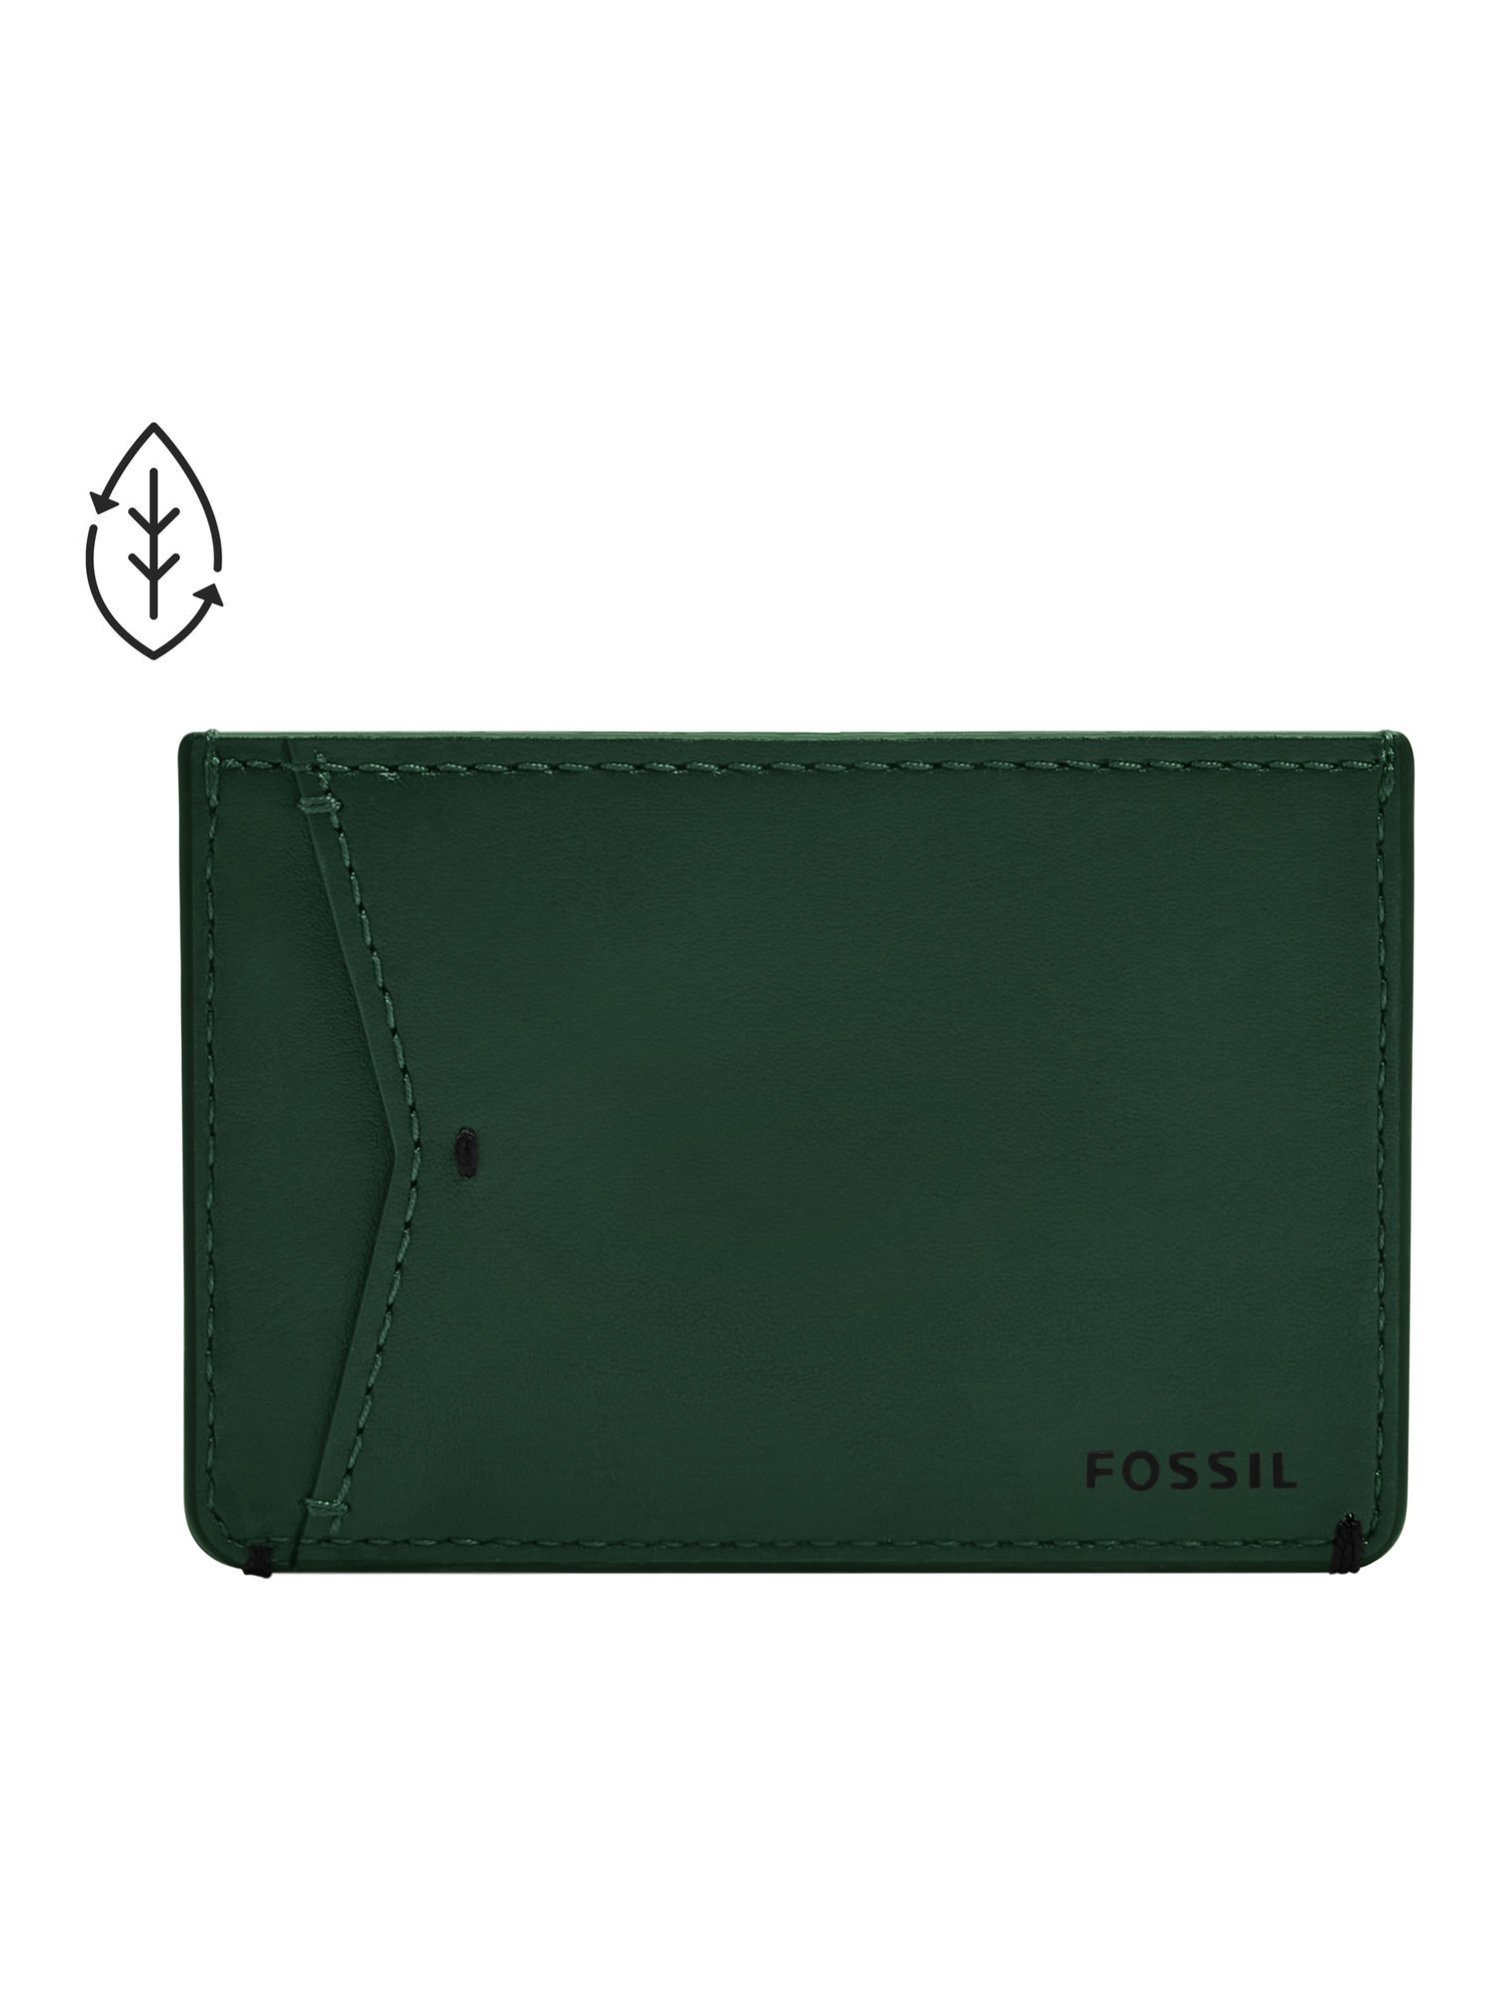 【SALE／50%OFF】FOSSIL FOSSIL/(M)JOSHUA CARD CASE ML4461298 フォッシル 財布・ポーチ・ケース 名刺入れ・カードケース グリーン